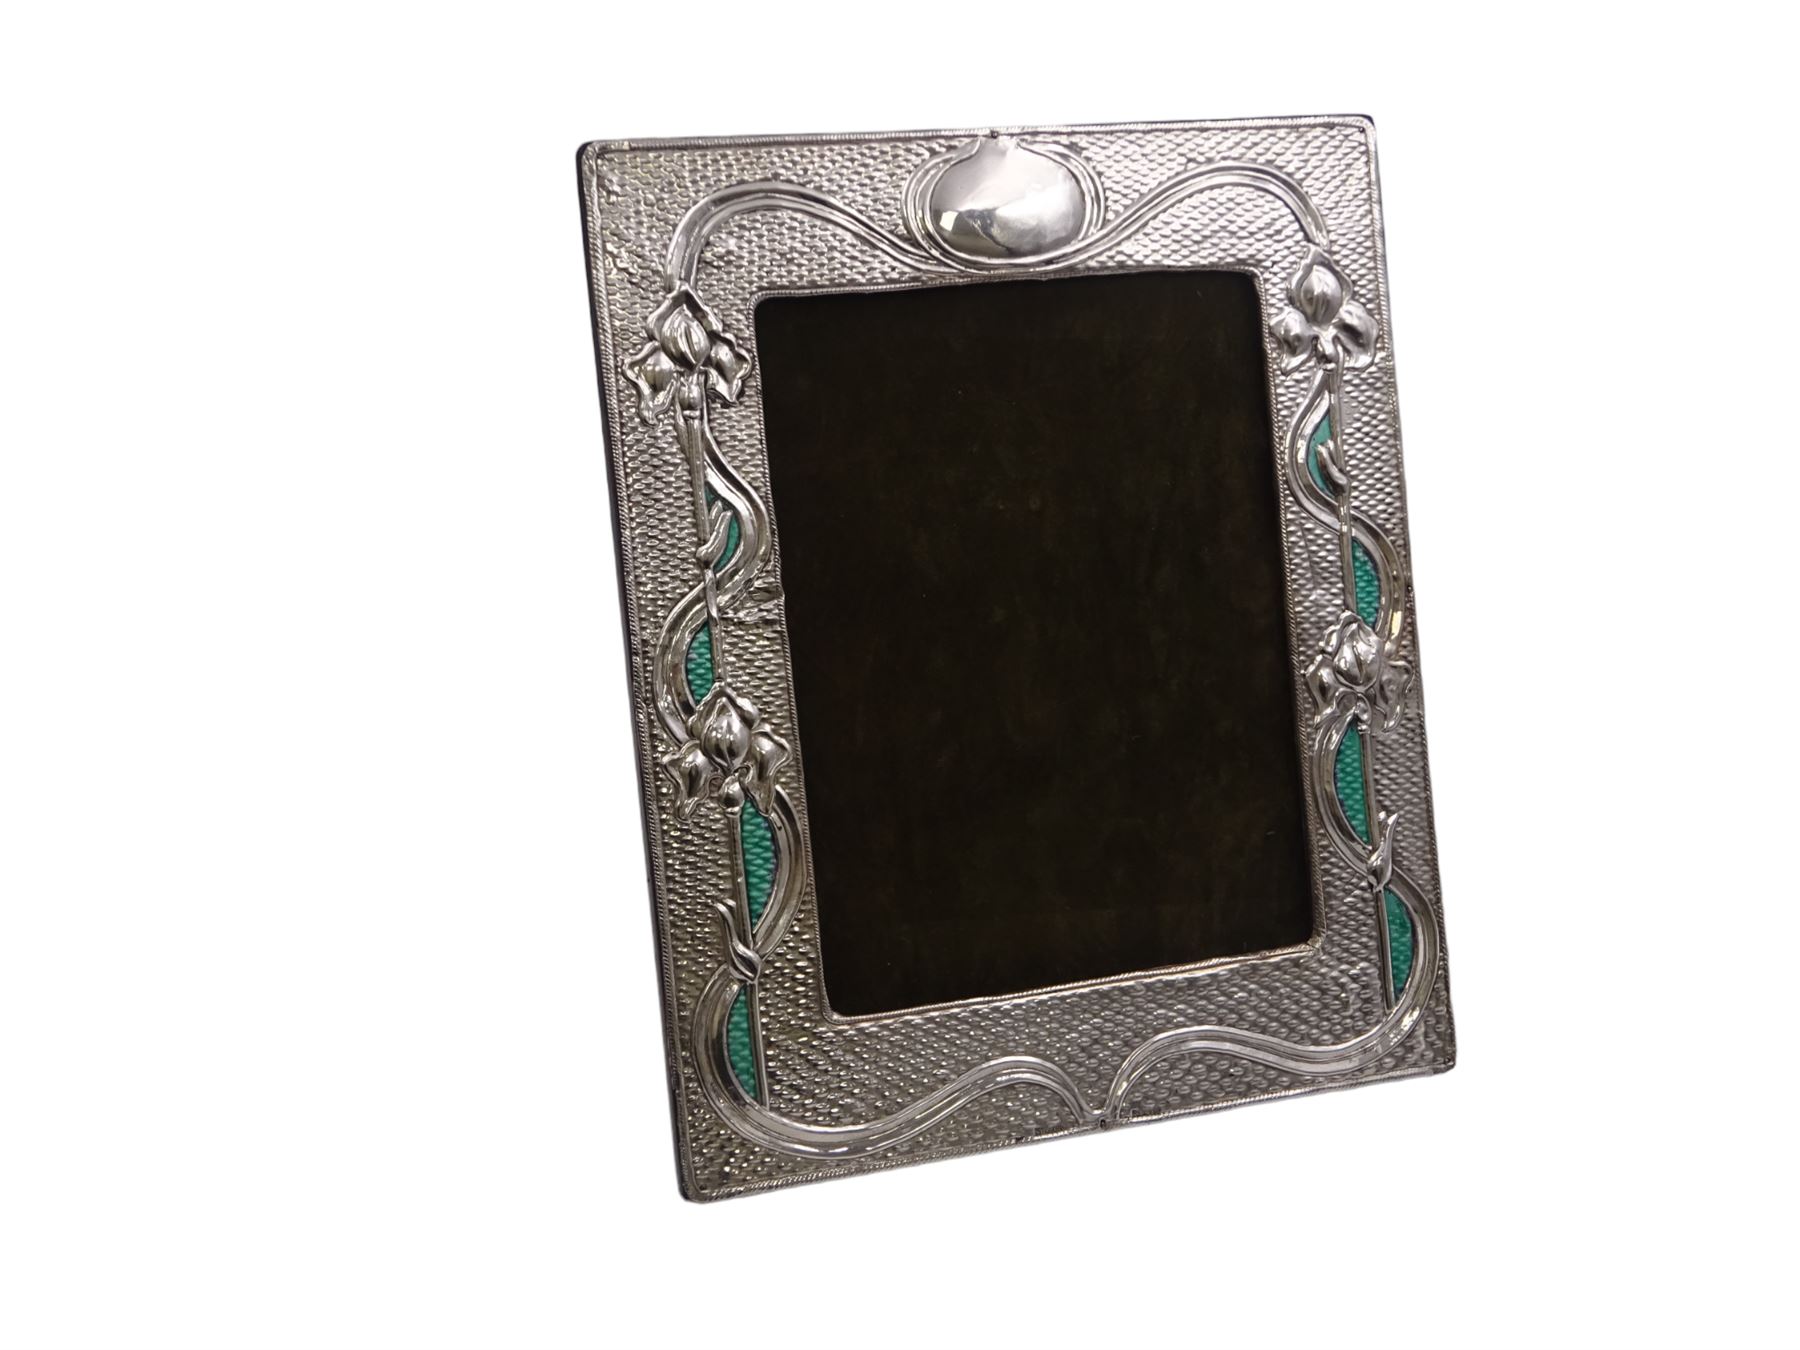 American Art Nouveau silver mounted photograph frame - Image 3 of 6